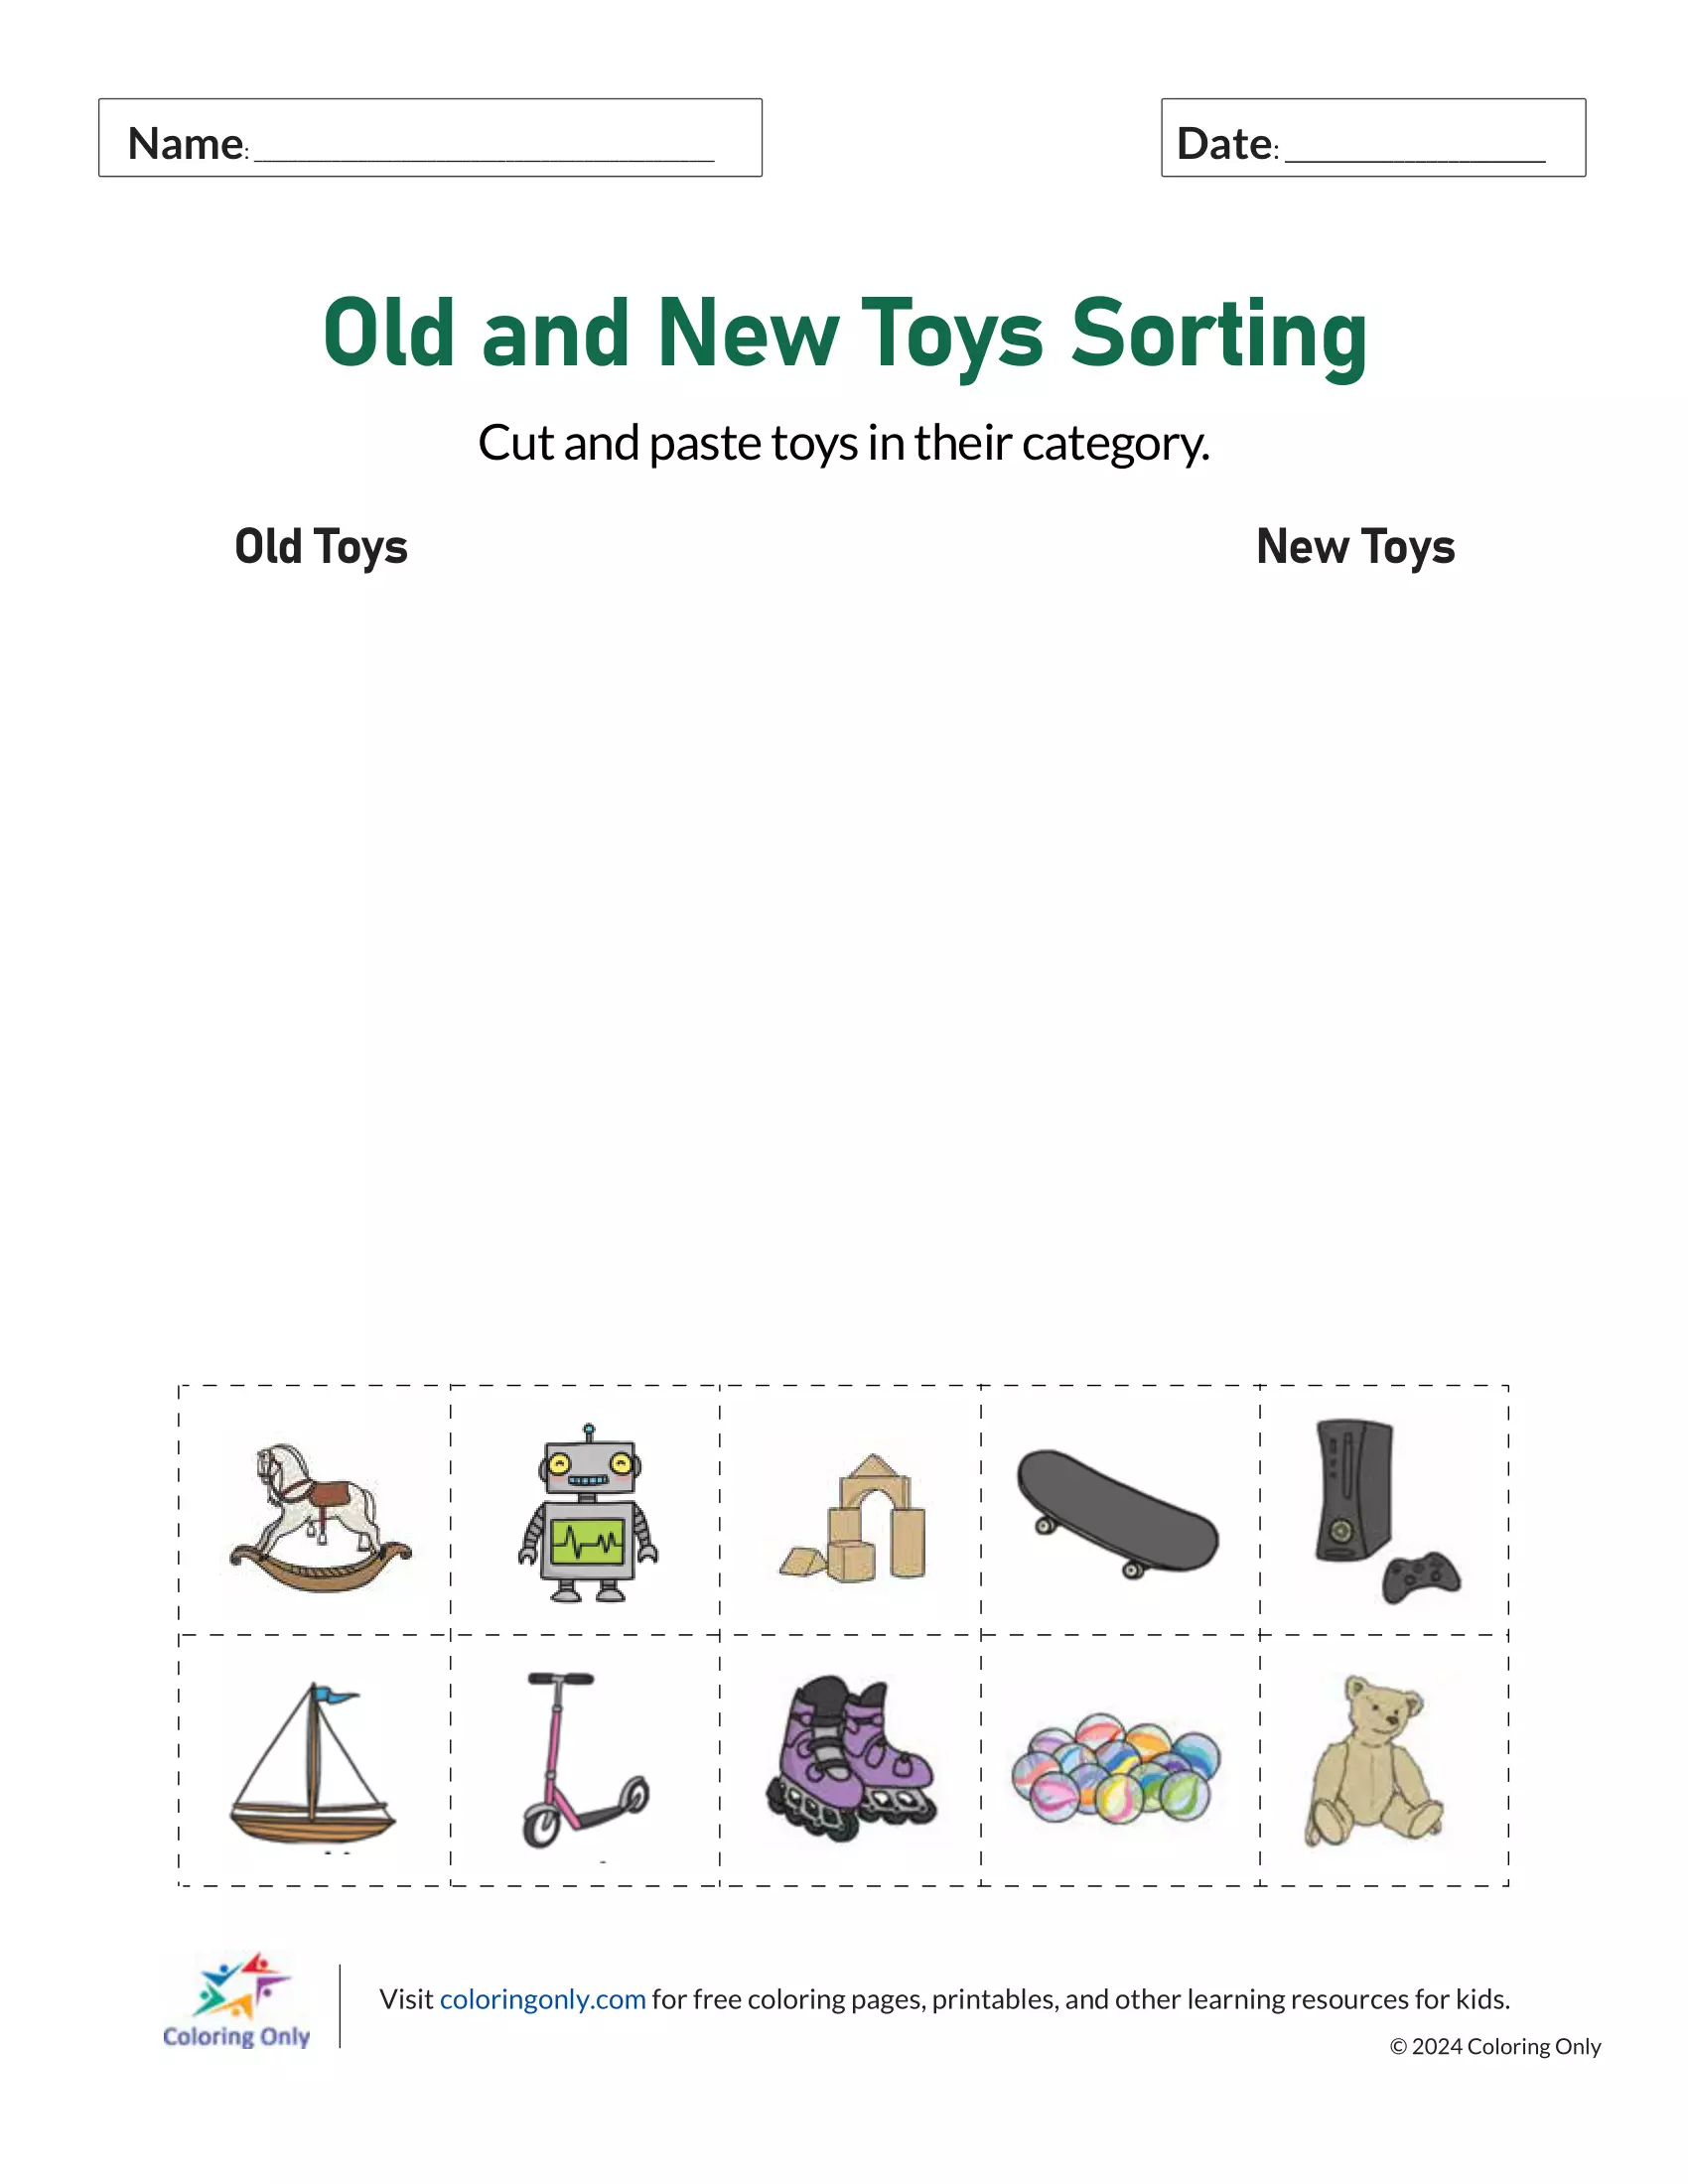 Old and New Toys Sorting Free Printable Worksheet